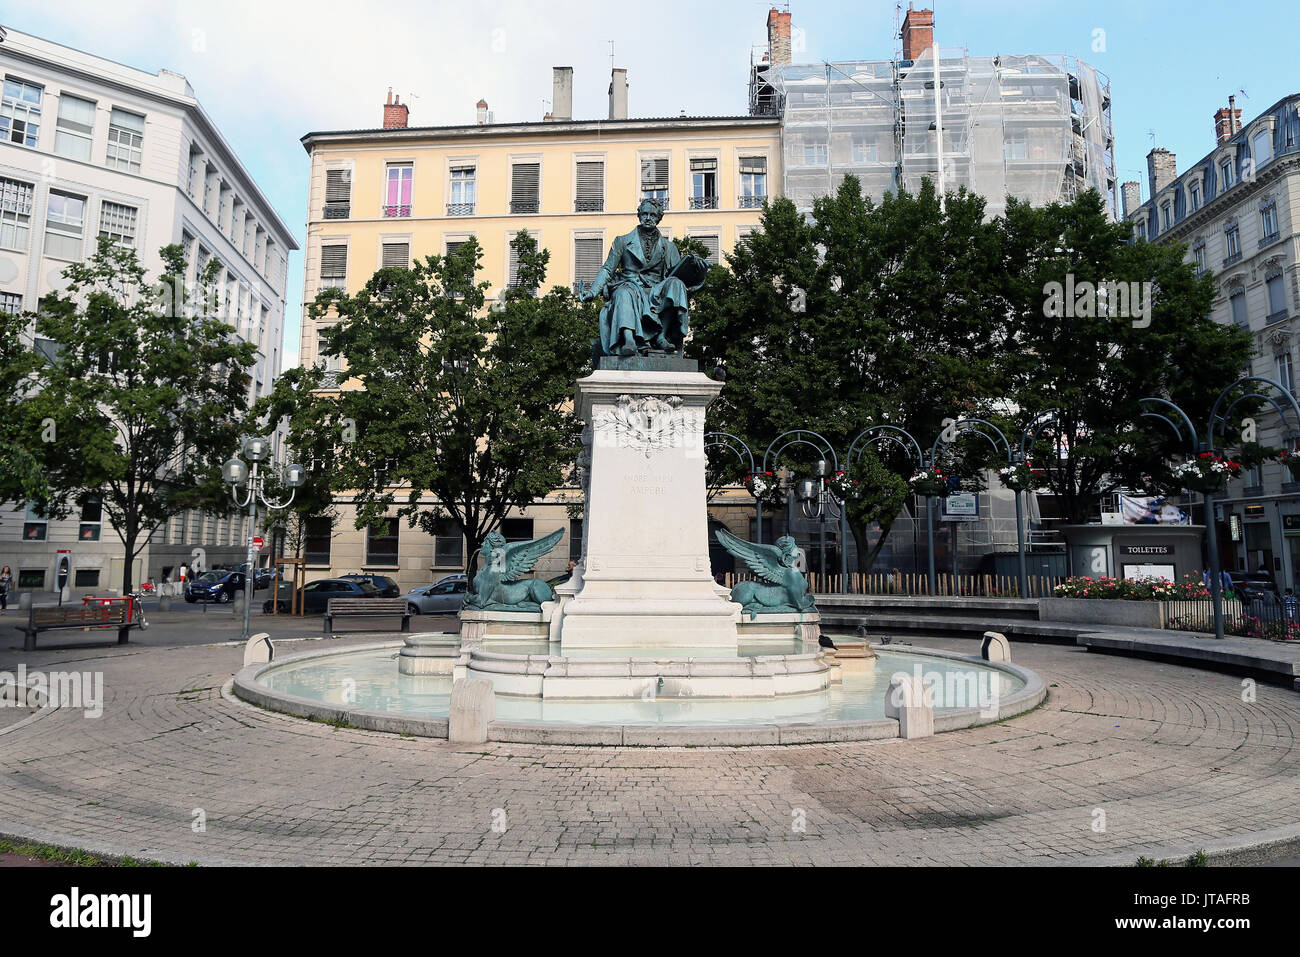 A statue made by Charles Textor portraying Andre-Marie Ampere erected in the center of the square, Lyon, Rhone Valley, France Stock Photo